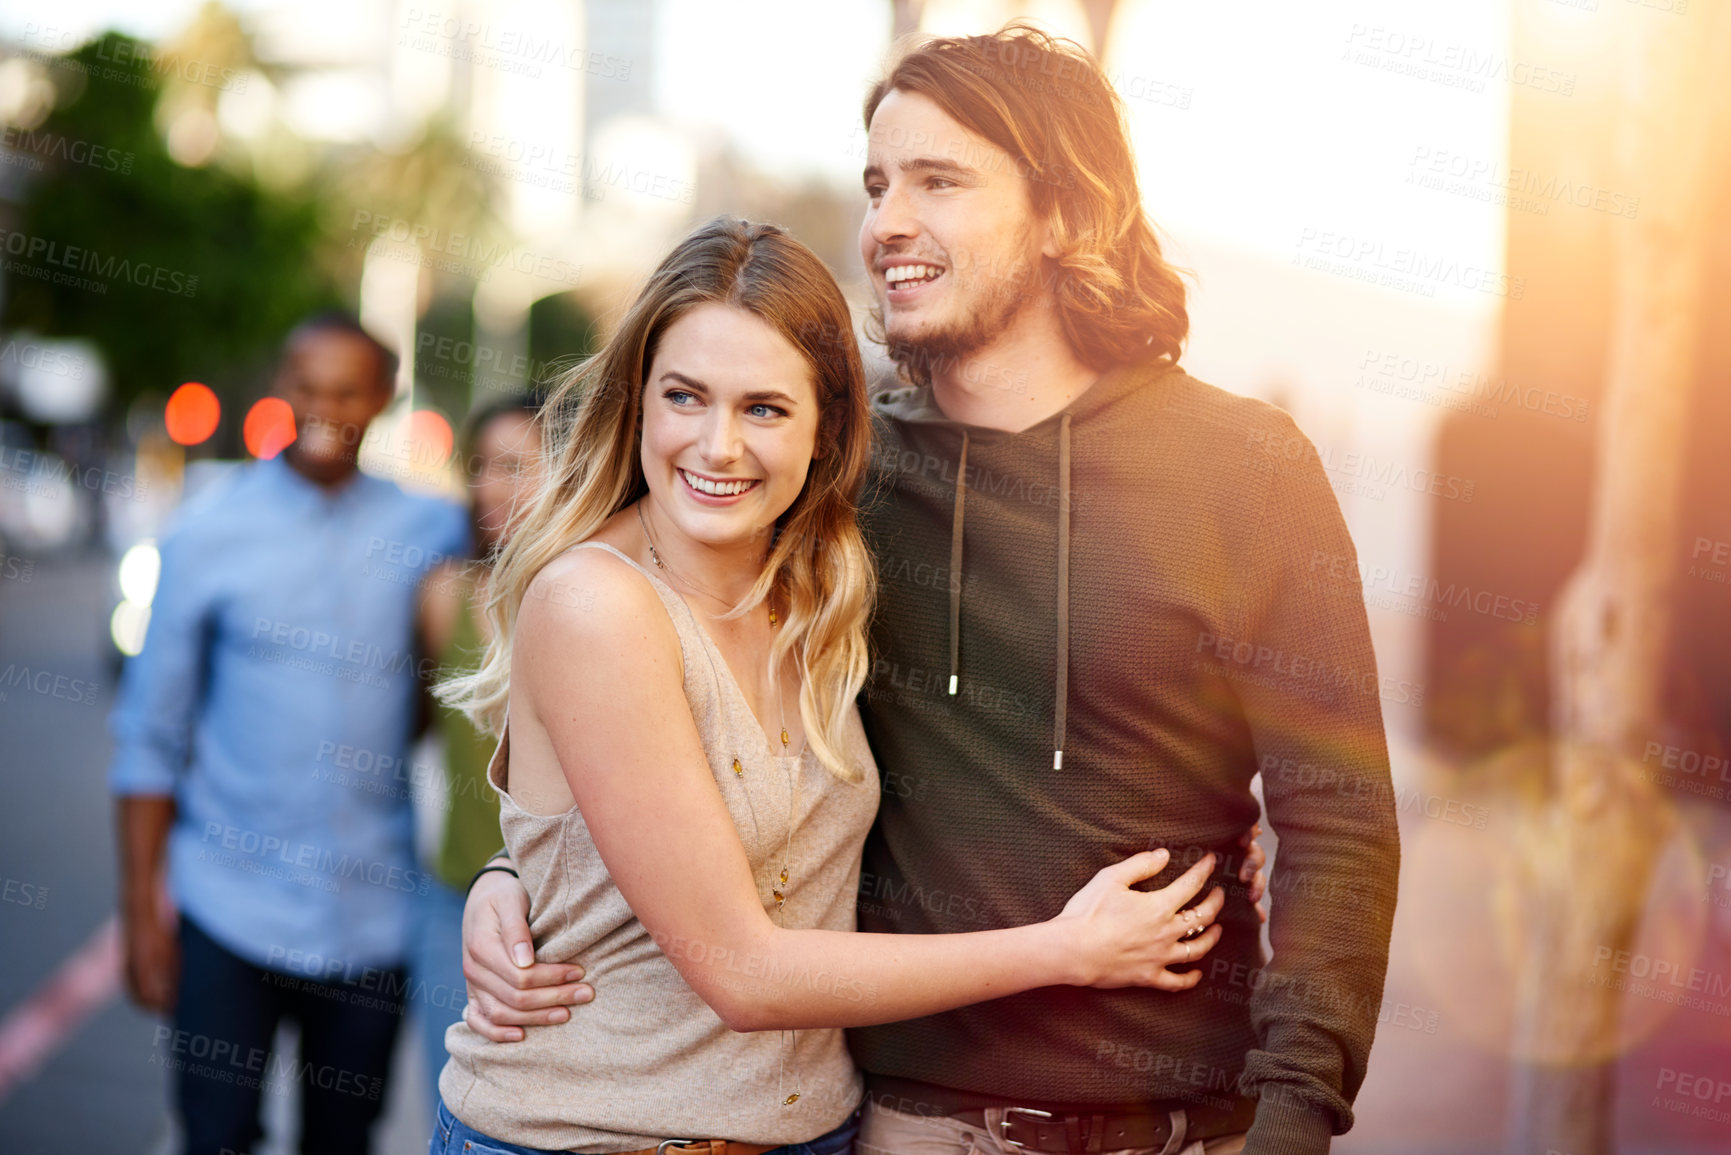 Buy stock photo Shot of two happy young couples taking a walk through the city